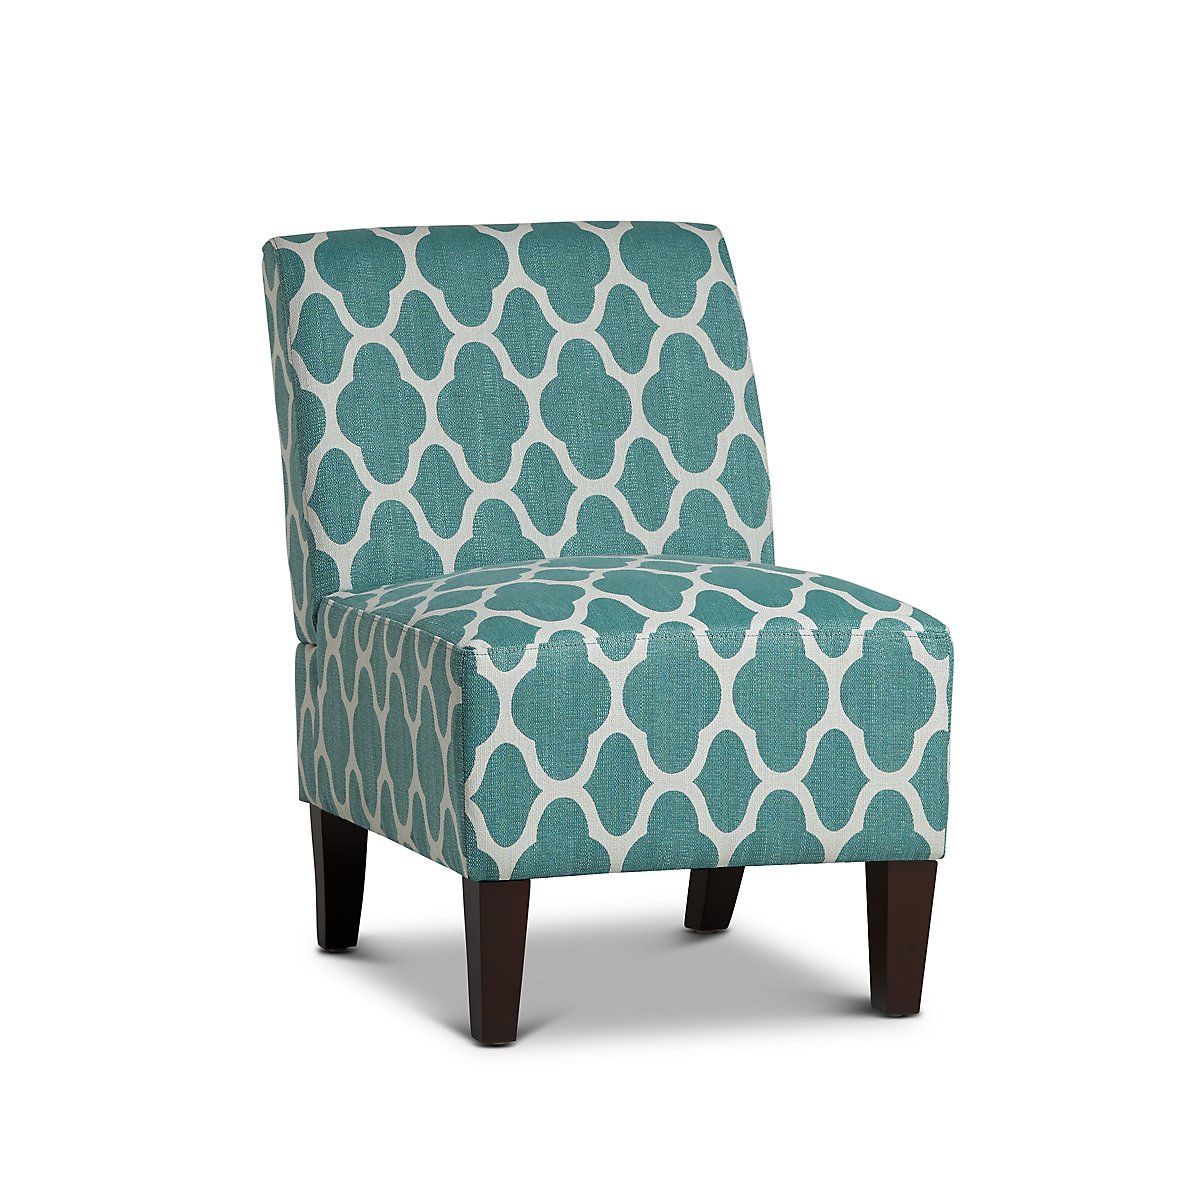 Comet Light Blue Fabric Accent Chair Living Room